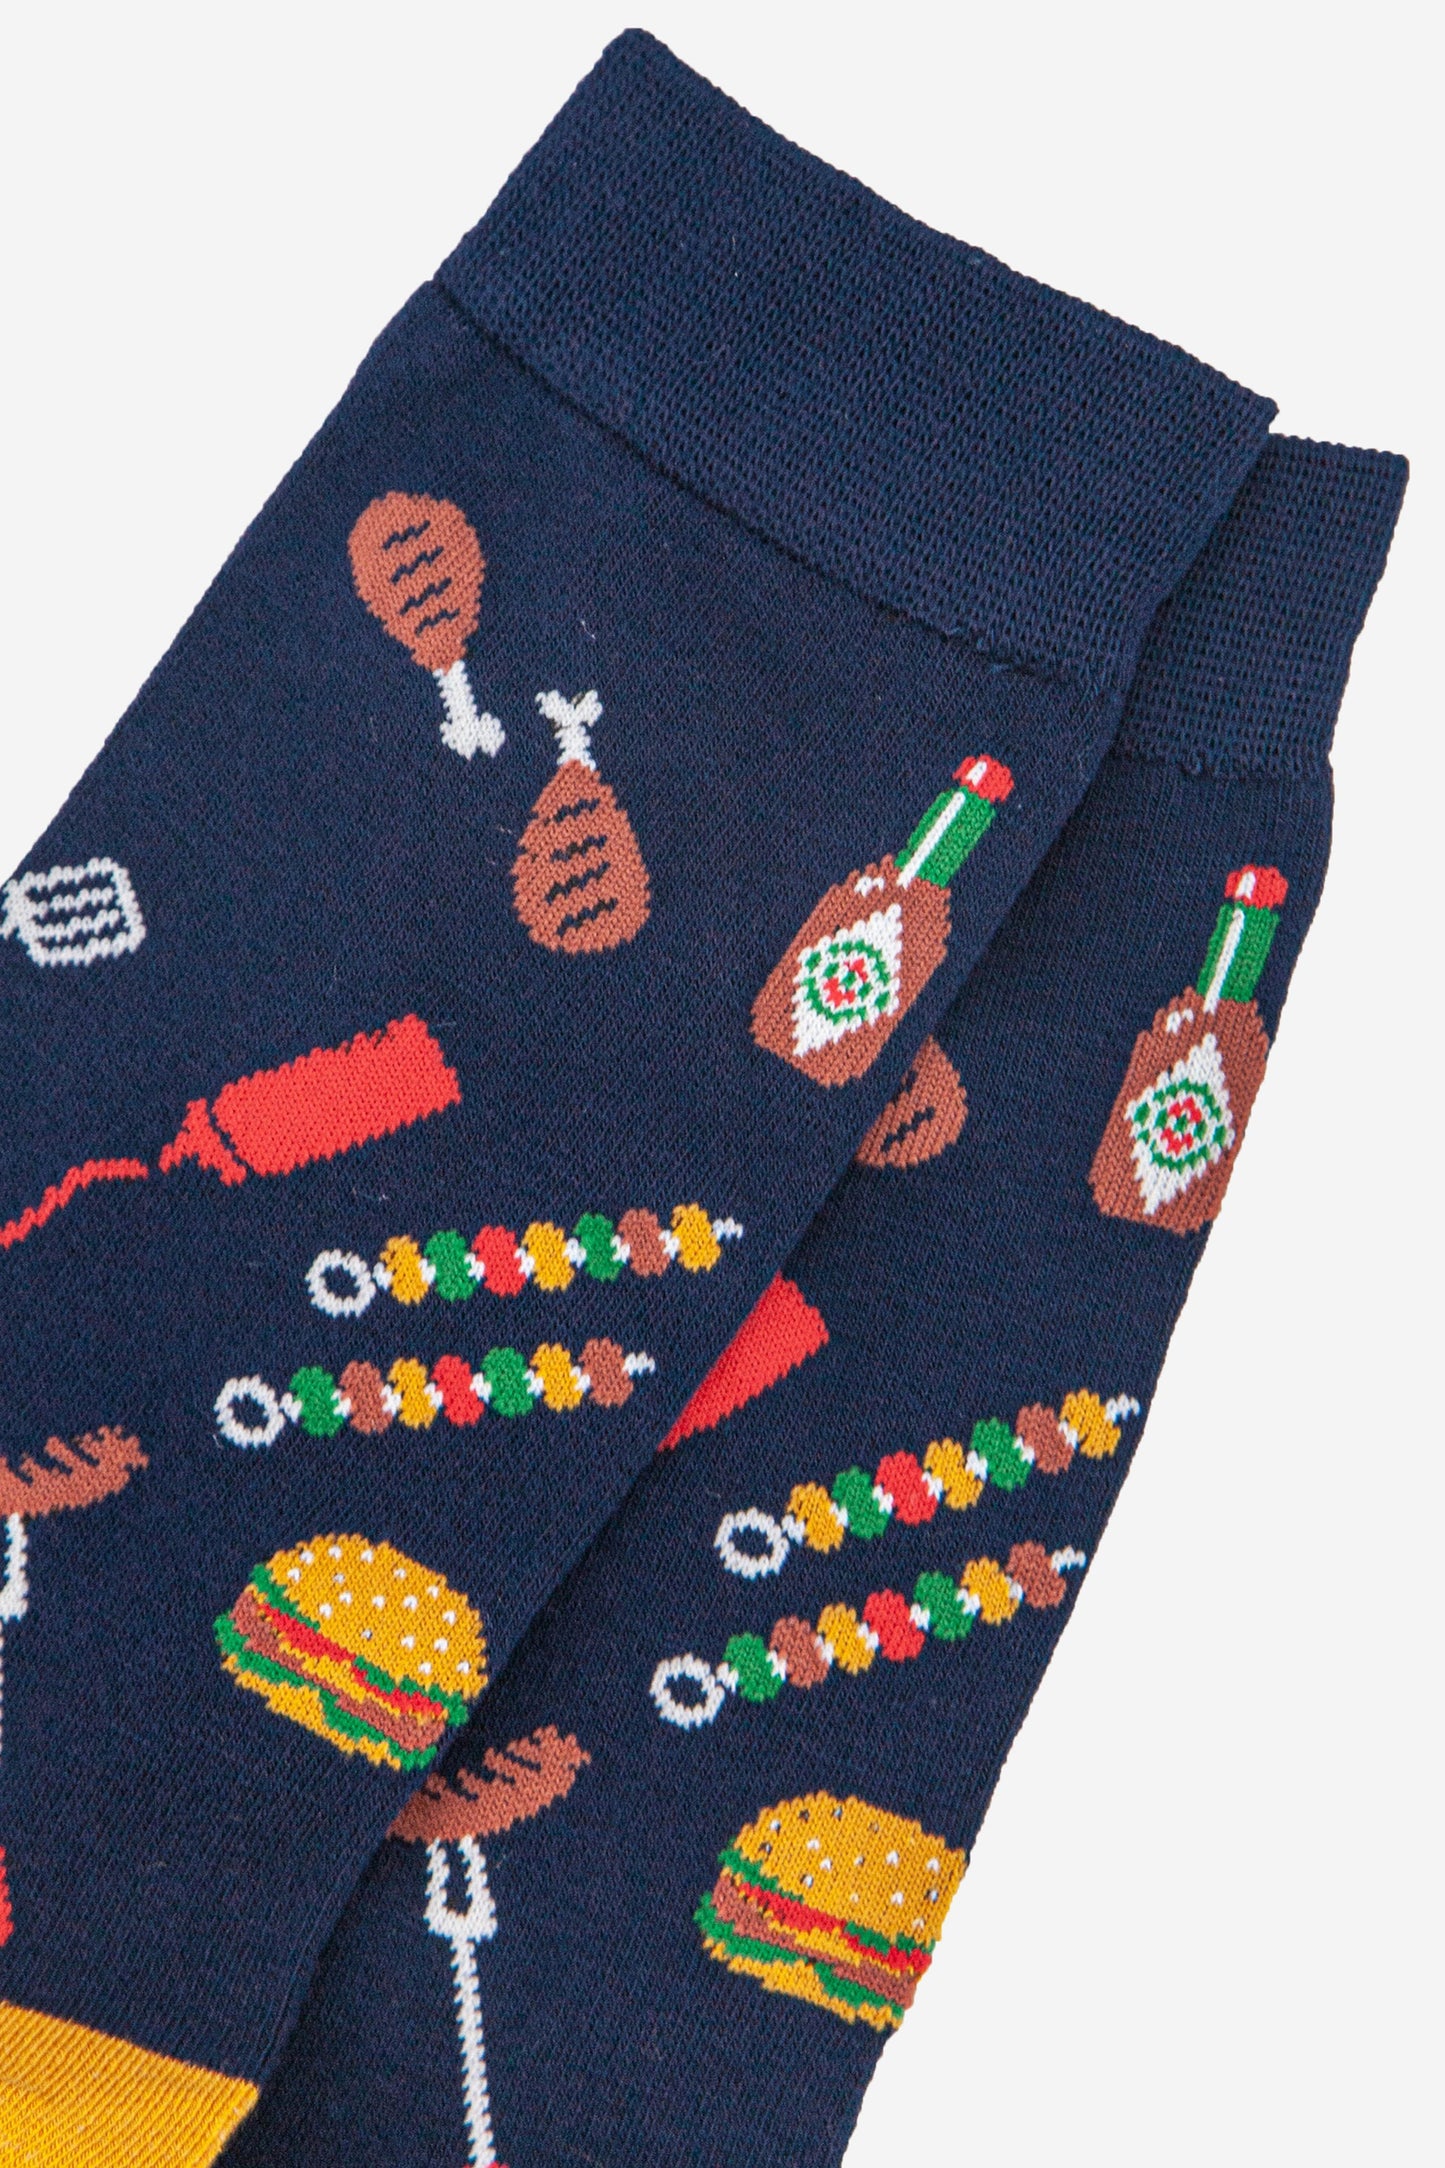 close up of the bbq grill design on the food socks